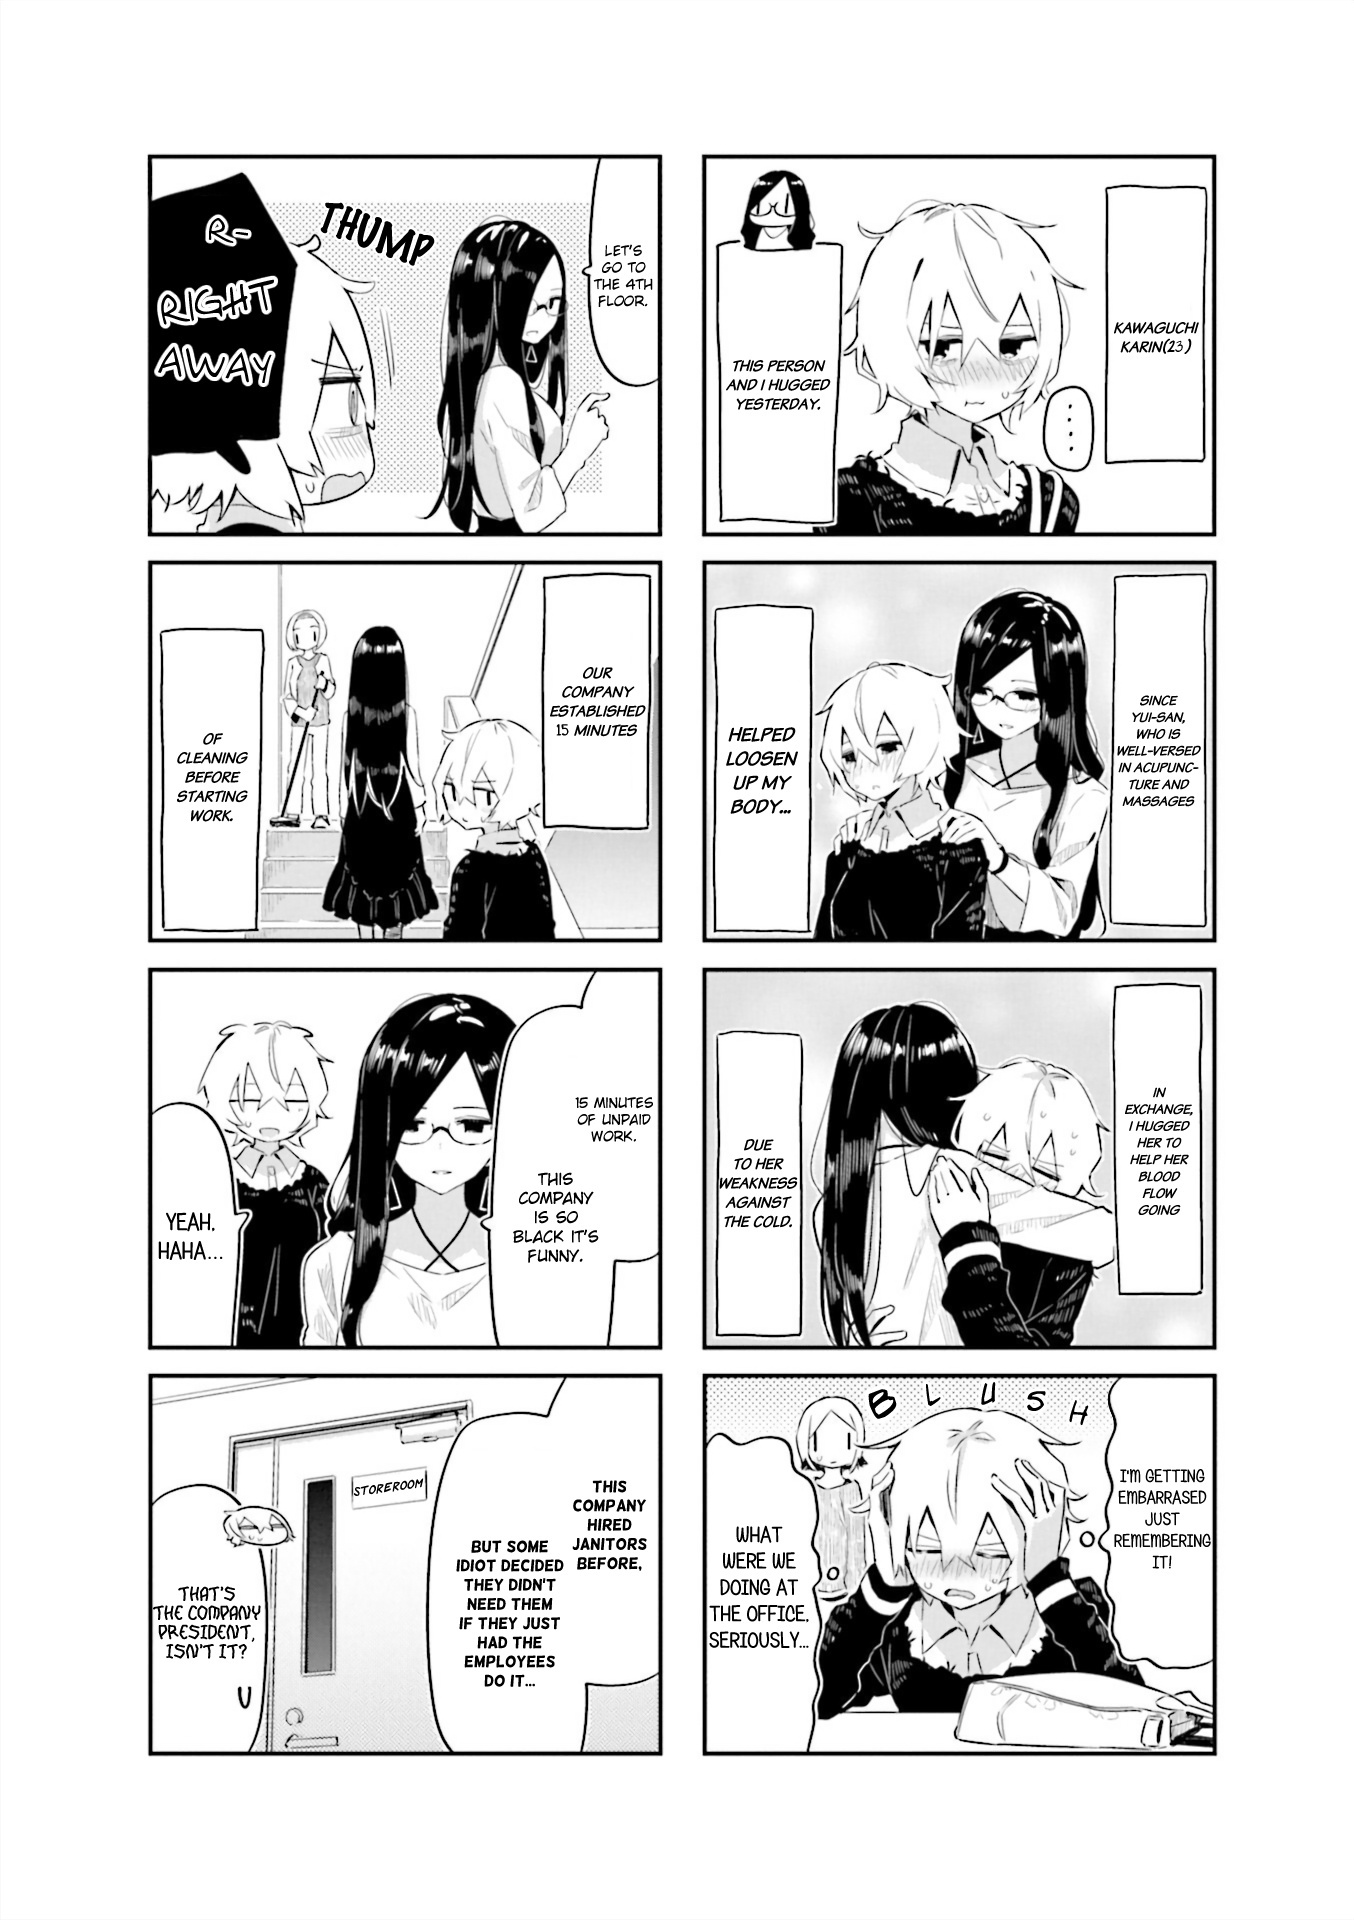 Hogushite, Yui-San Vol.1 Chapter 2: Serious To A Fault - Picture 2